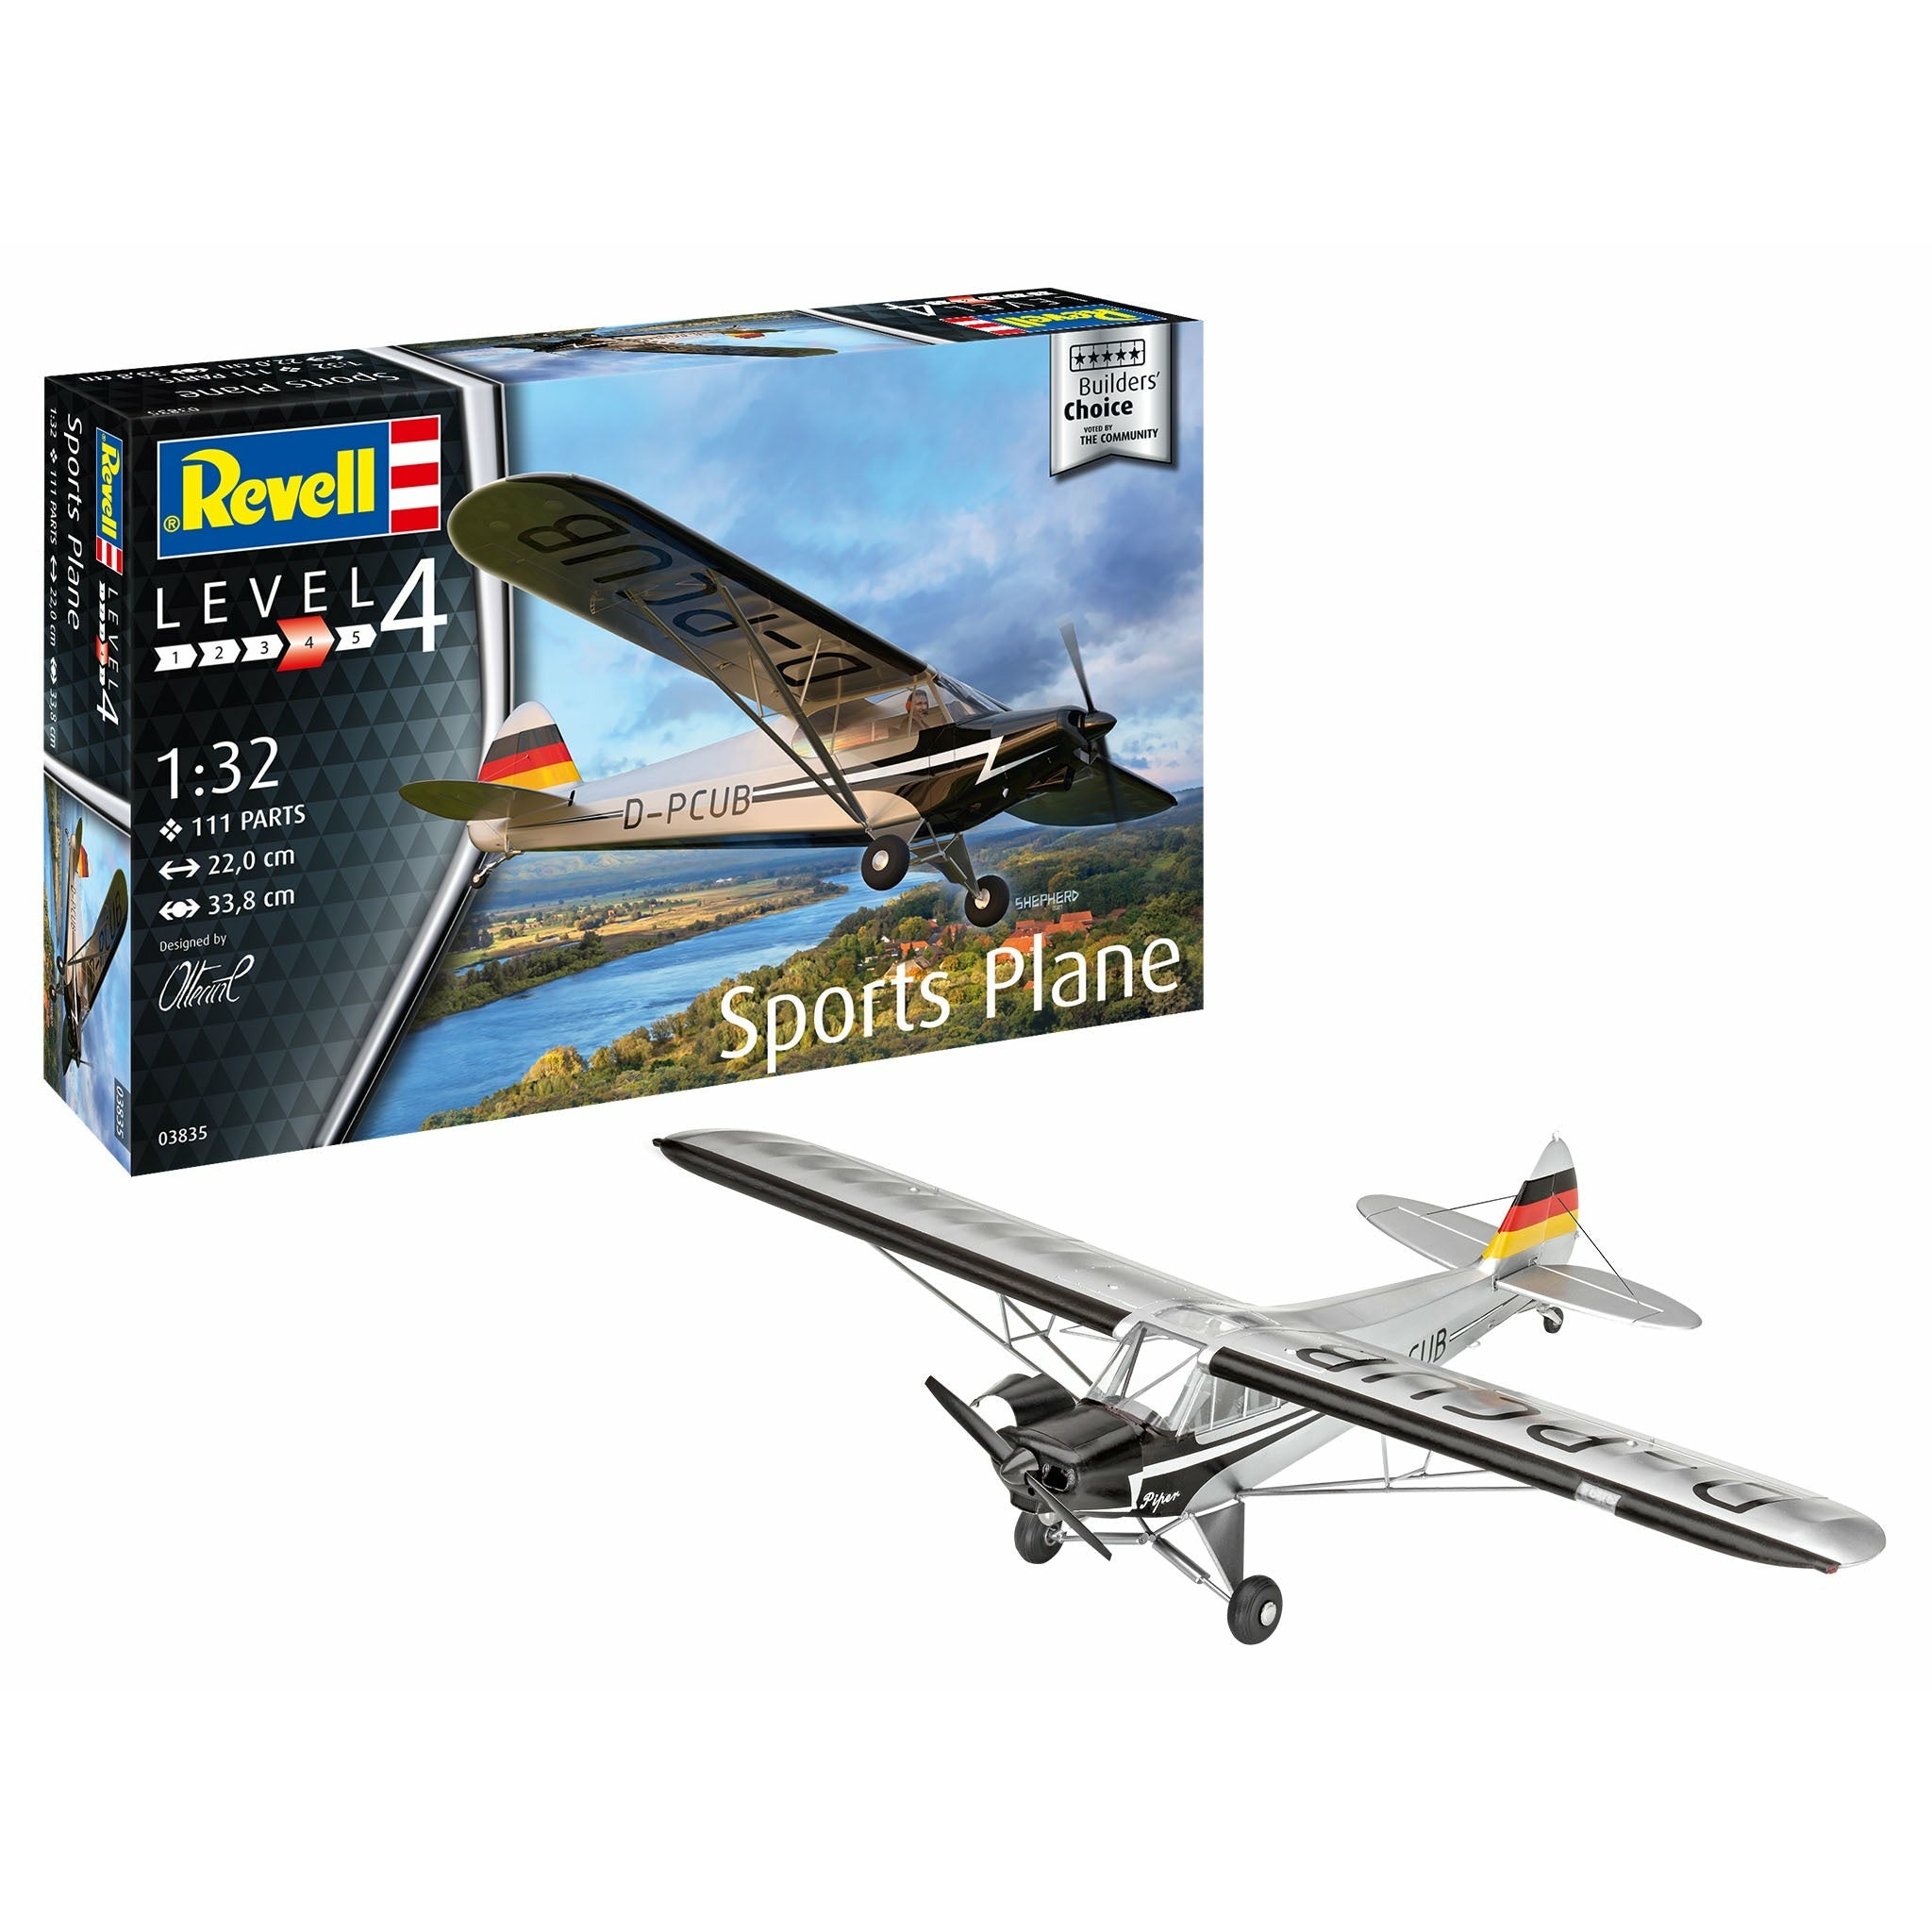 Sports Plane Builders Choice 1/32 #3835 by Revell